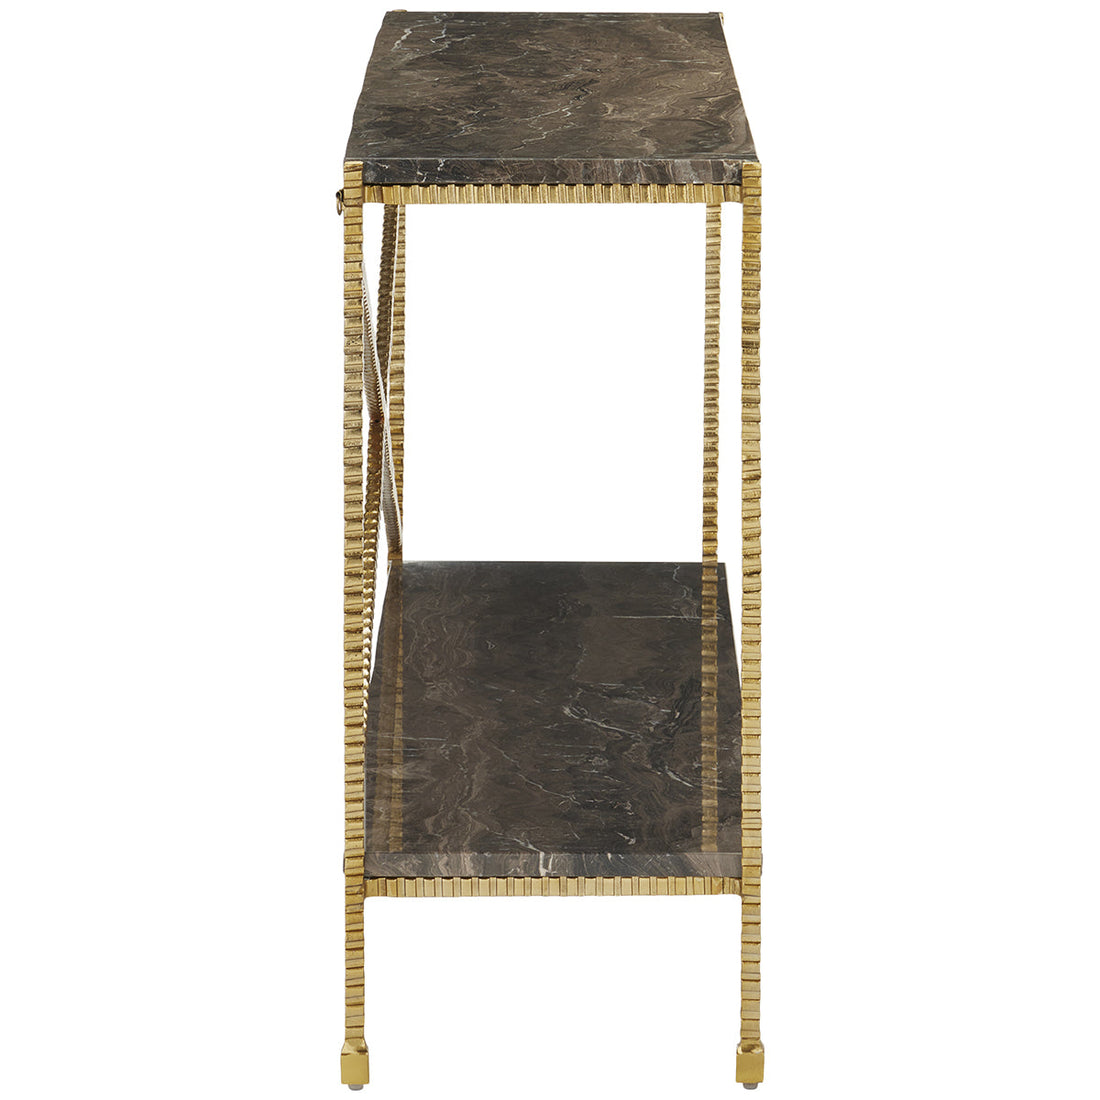 Currey and Company Flying Gold Marble Console Table